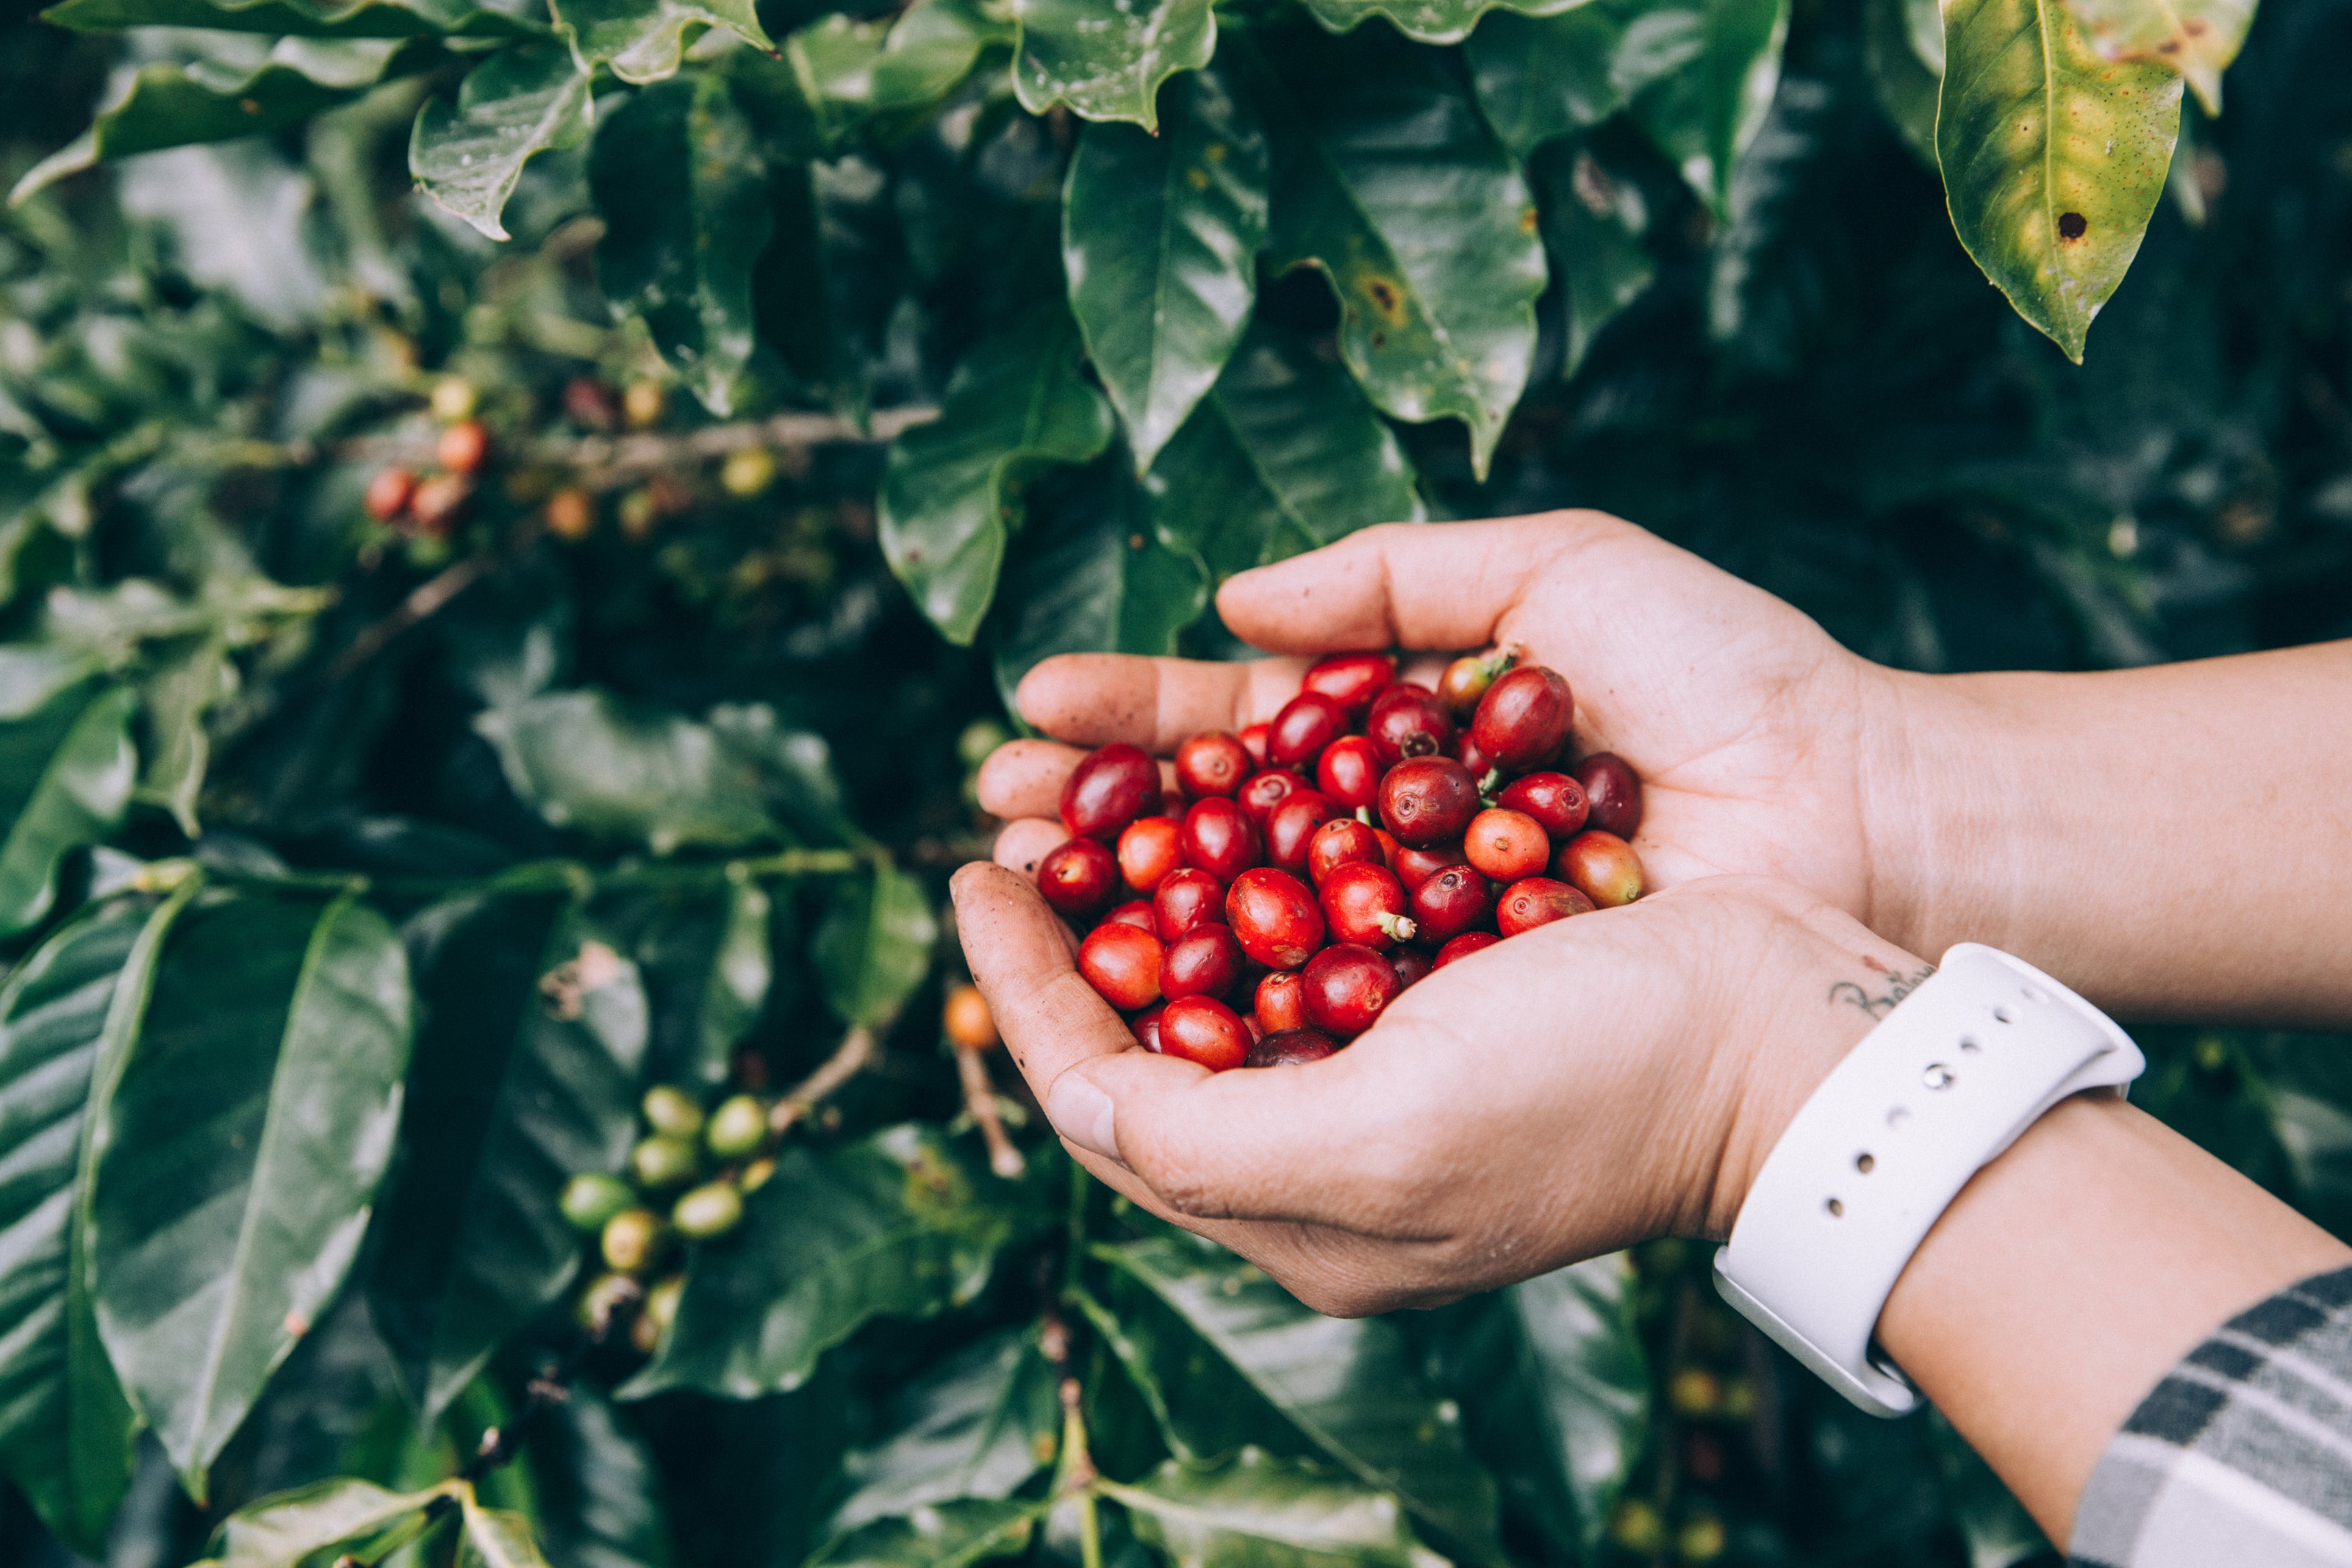 A man is holding freshly picked coffee beans